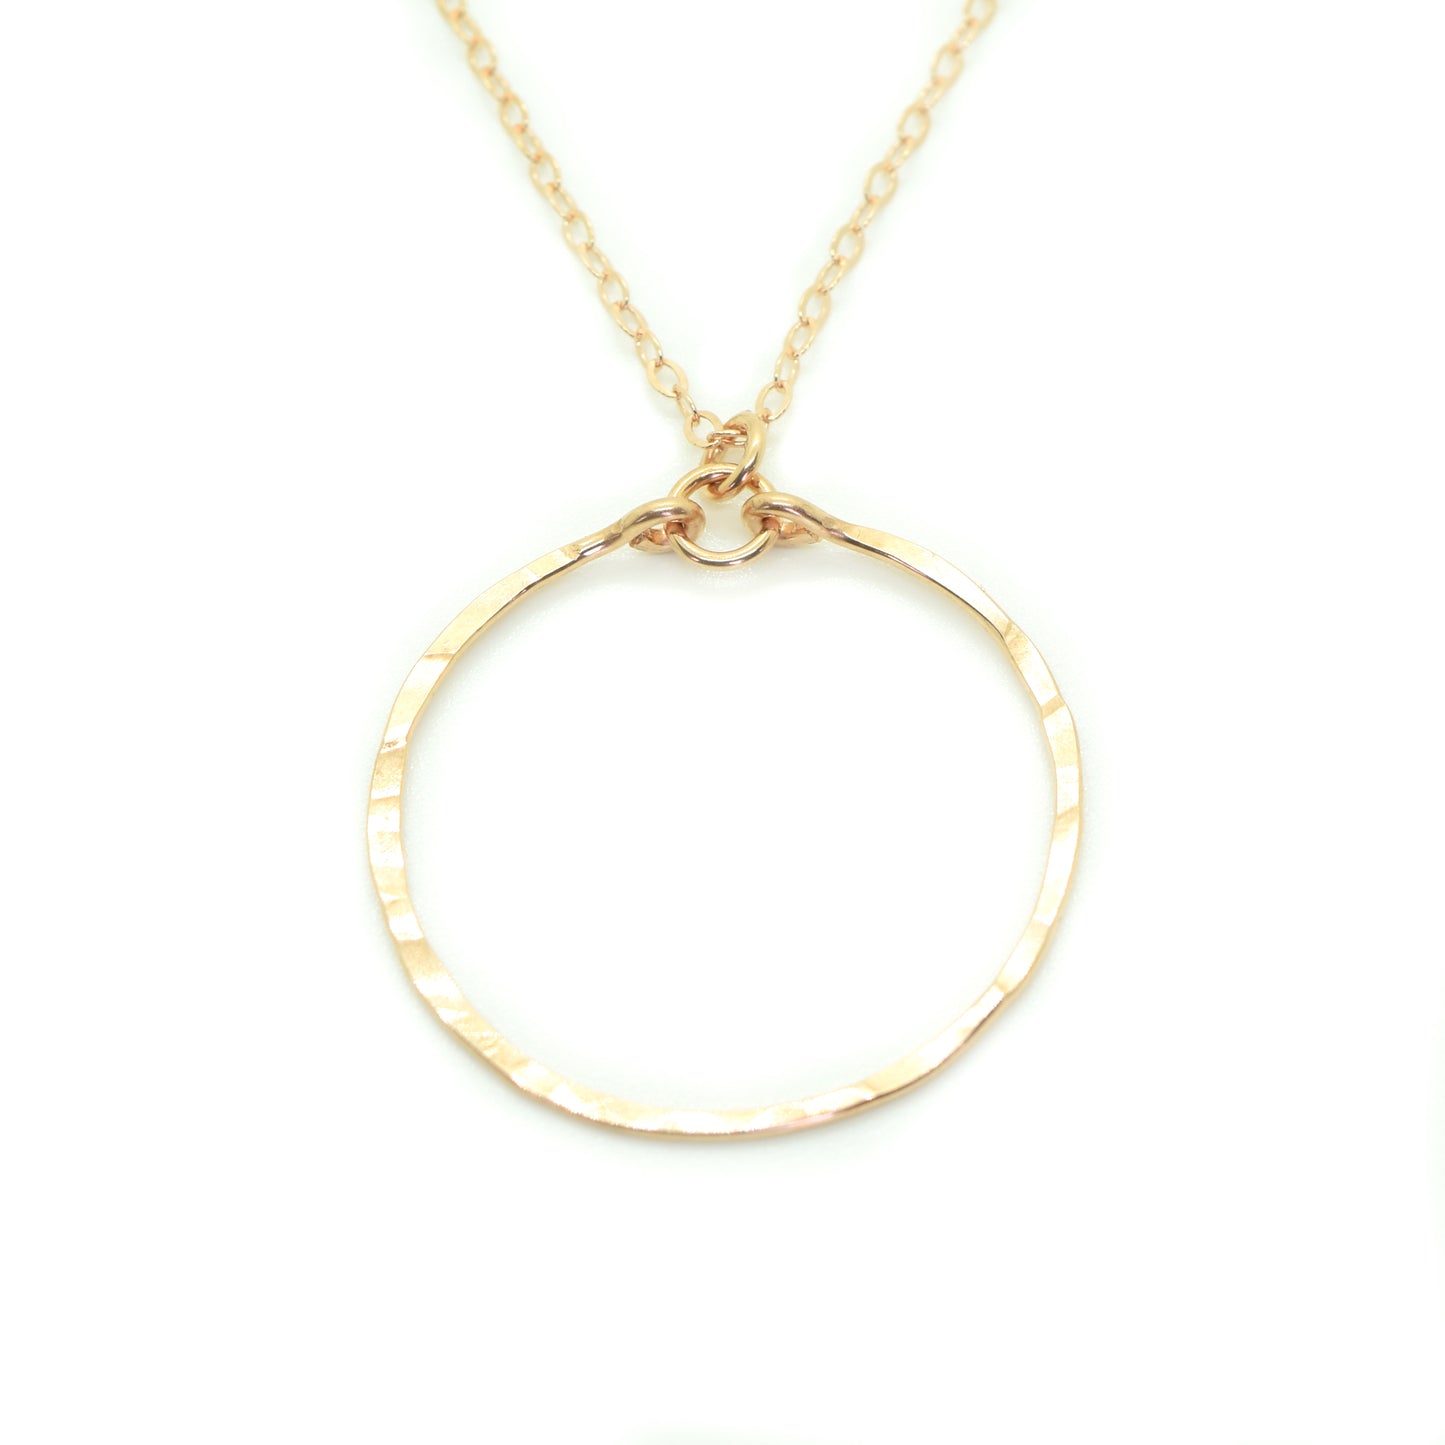 Meridian Gold Circle Pendant or Necklace